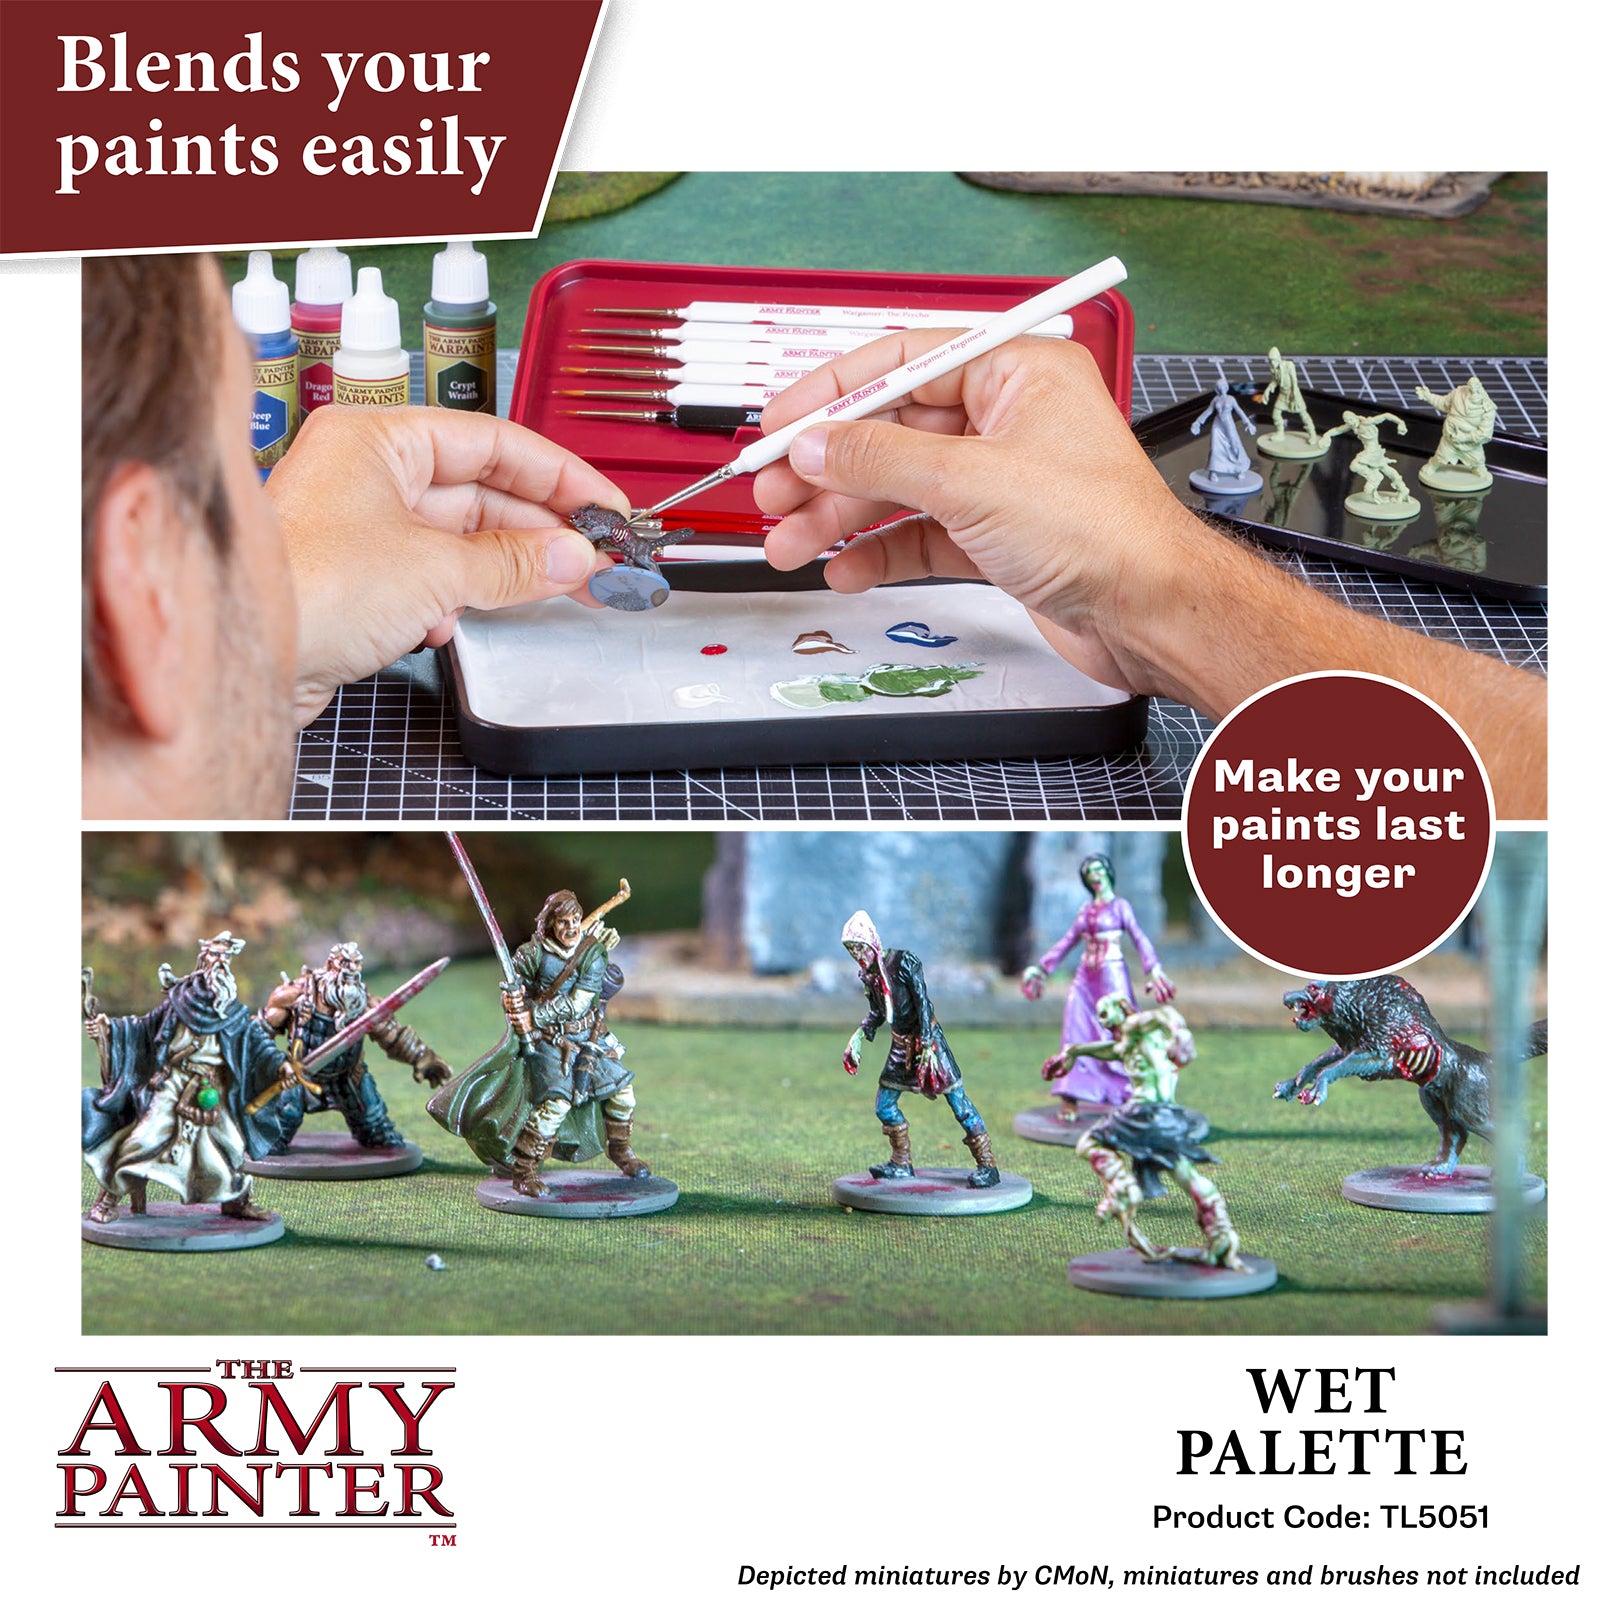 Battlefields Basing Set - A all-in-one basing set - The Army Painter